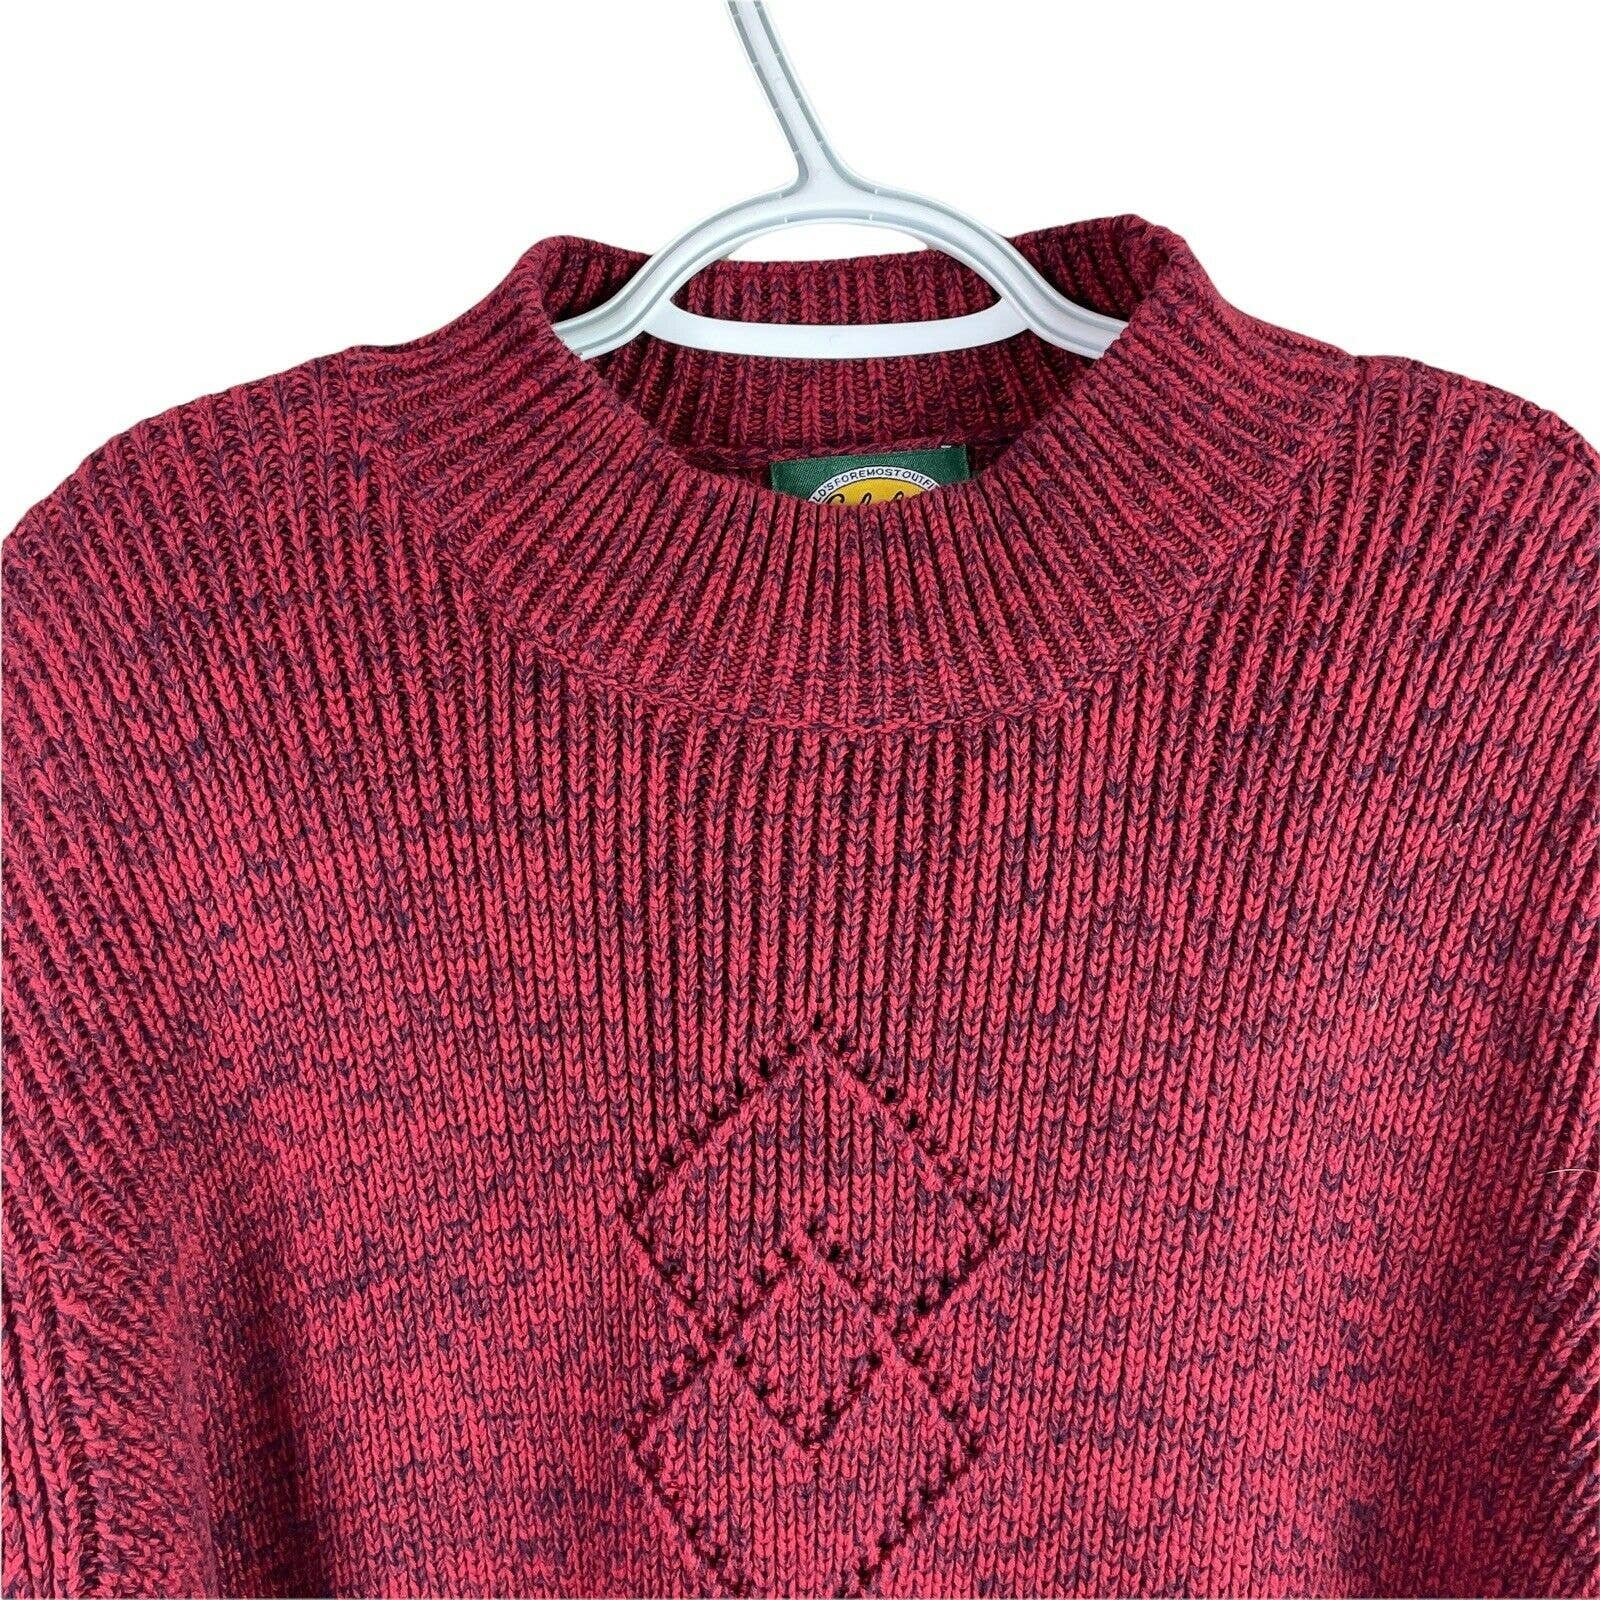 the Lowest price Cabelas Mock Neck Sweater Womens L Red Pullover Cotton Cable Knit Heavy L86hCBgCY just buy it